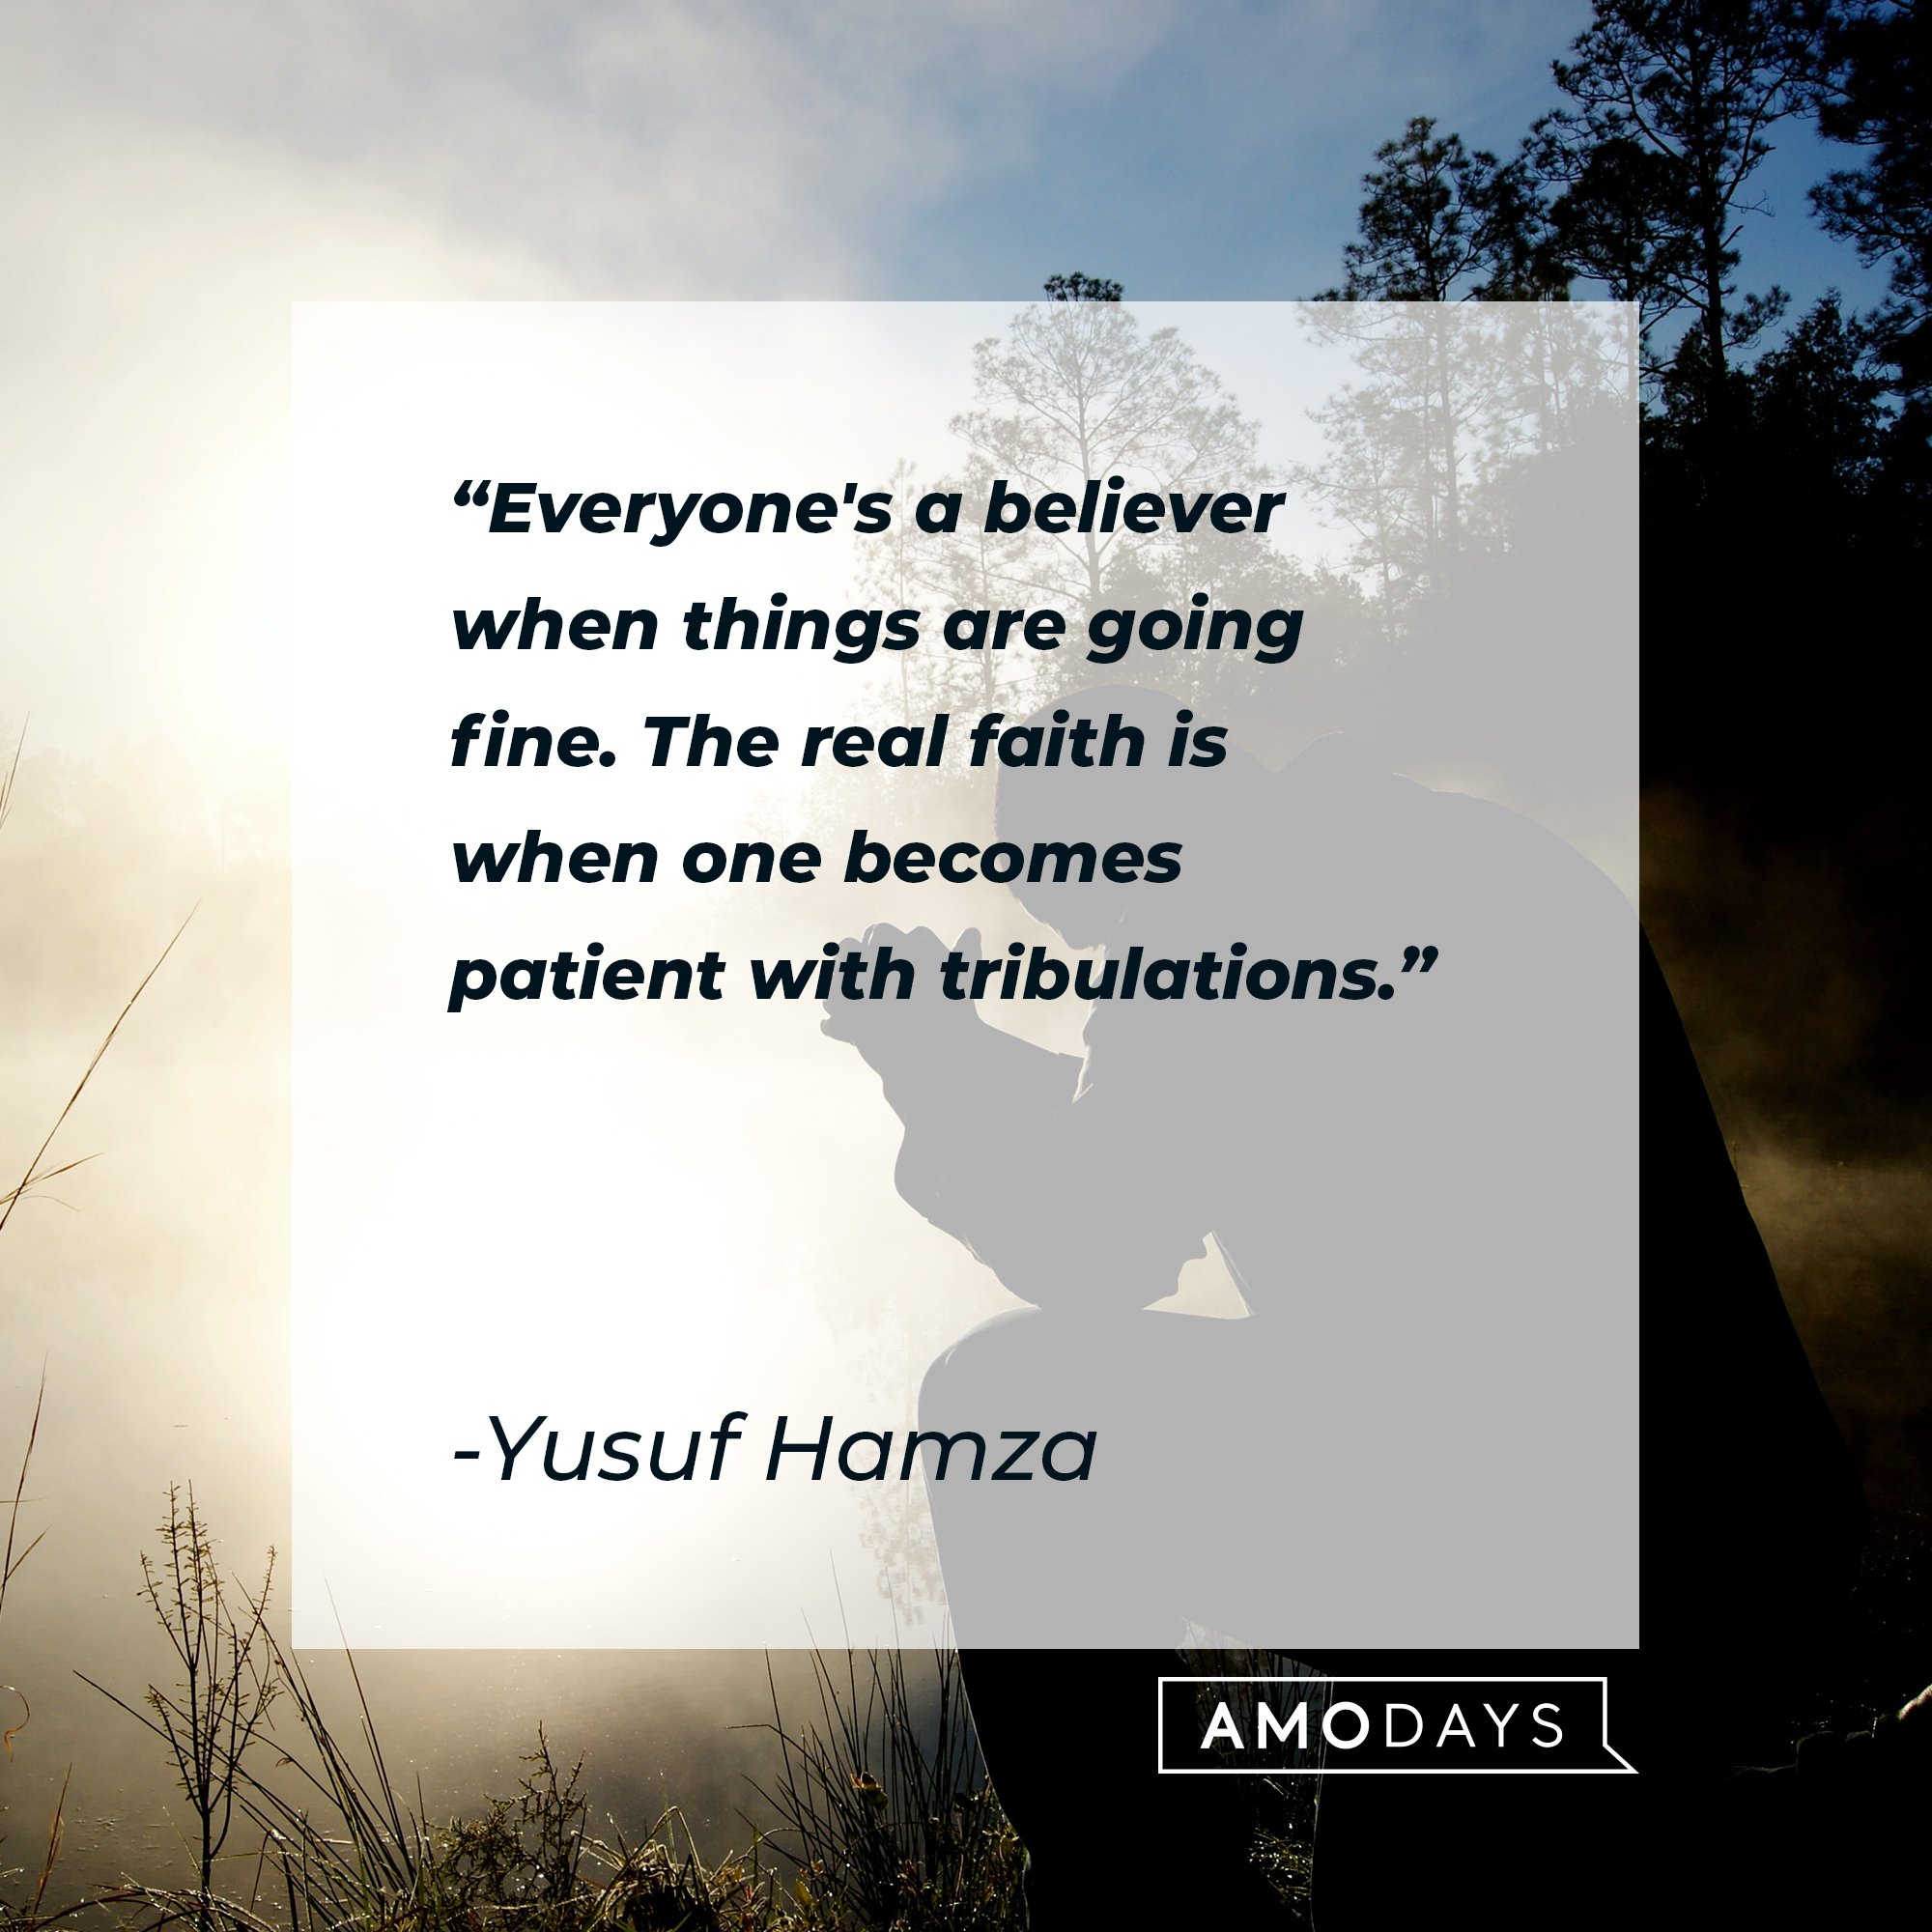 Yusuf Hamza’s quote: "Everyone's a believer when things are going fine. The real faith is when one becomes patient with tribulations." | Image: AmoDays  